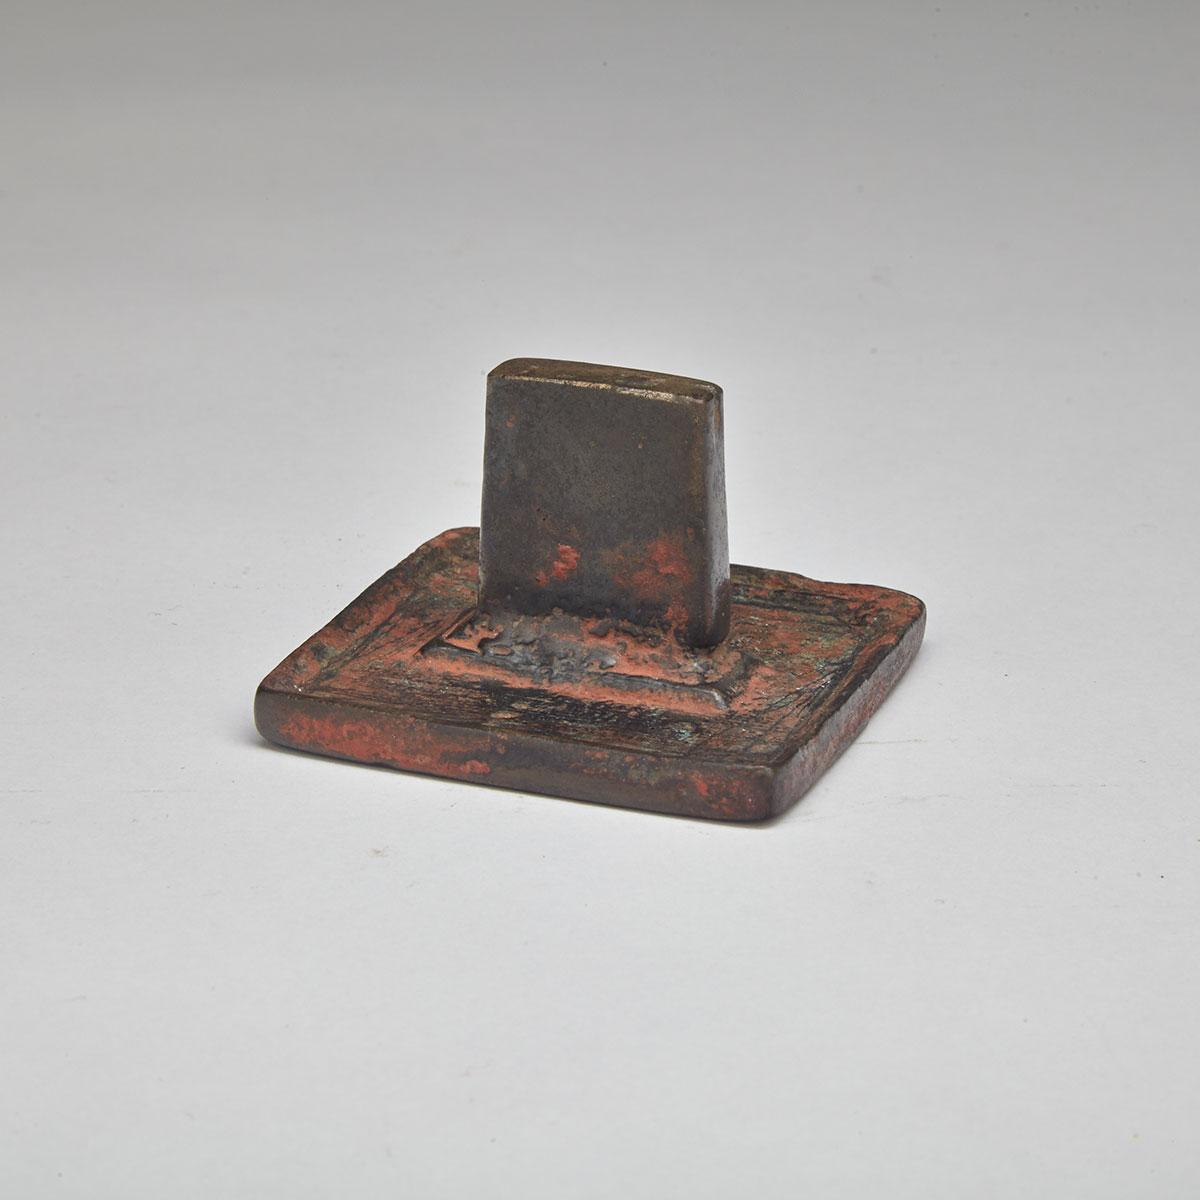 Bronze Seal, Song Dynasty or Later